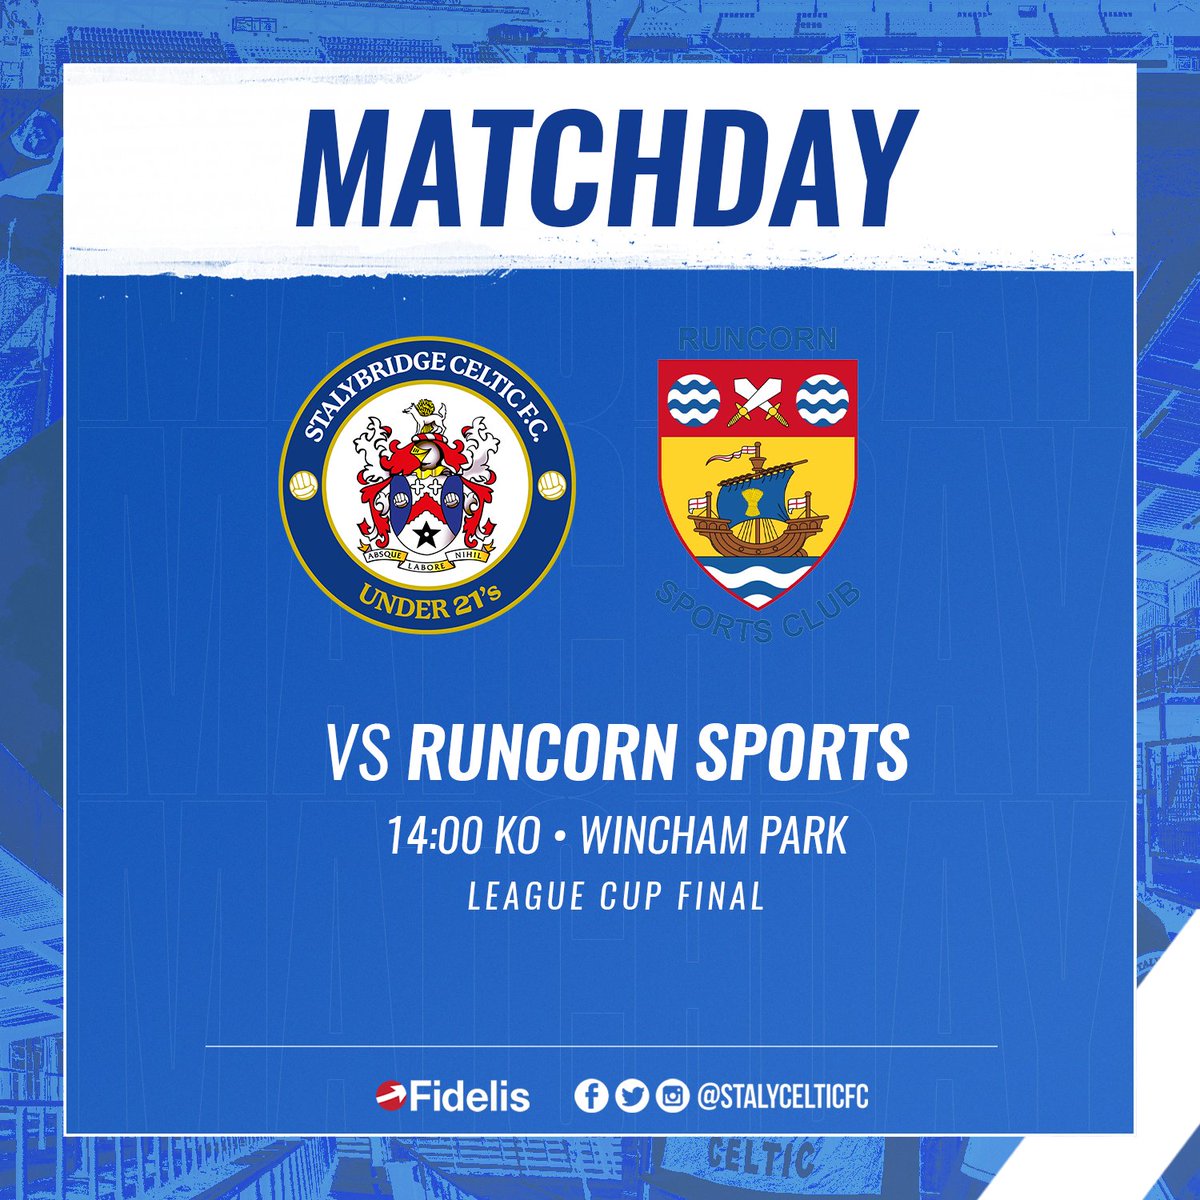 It's League Cup final day! 🏆